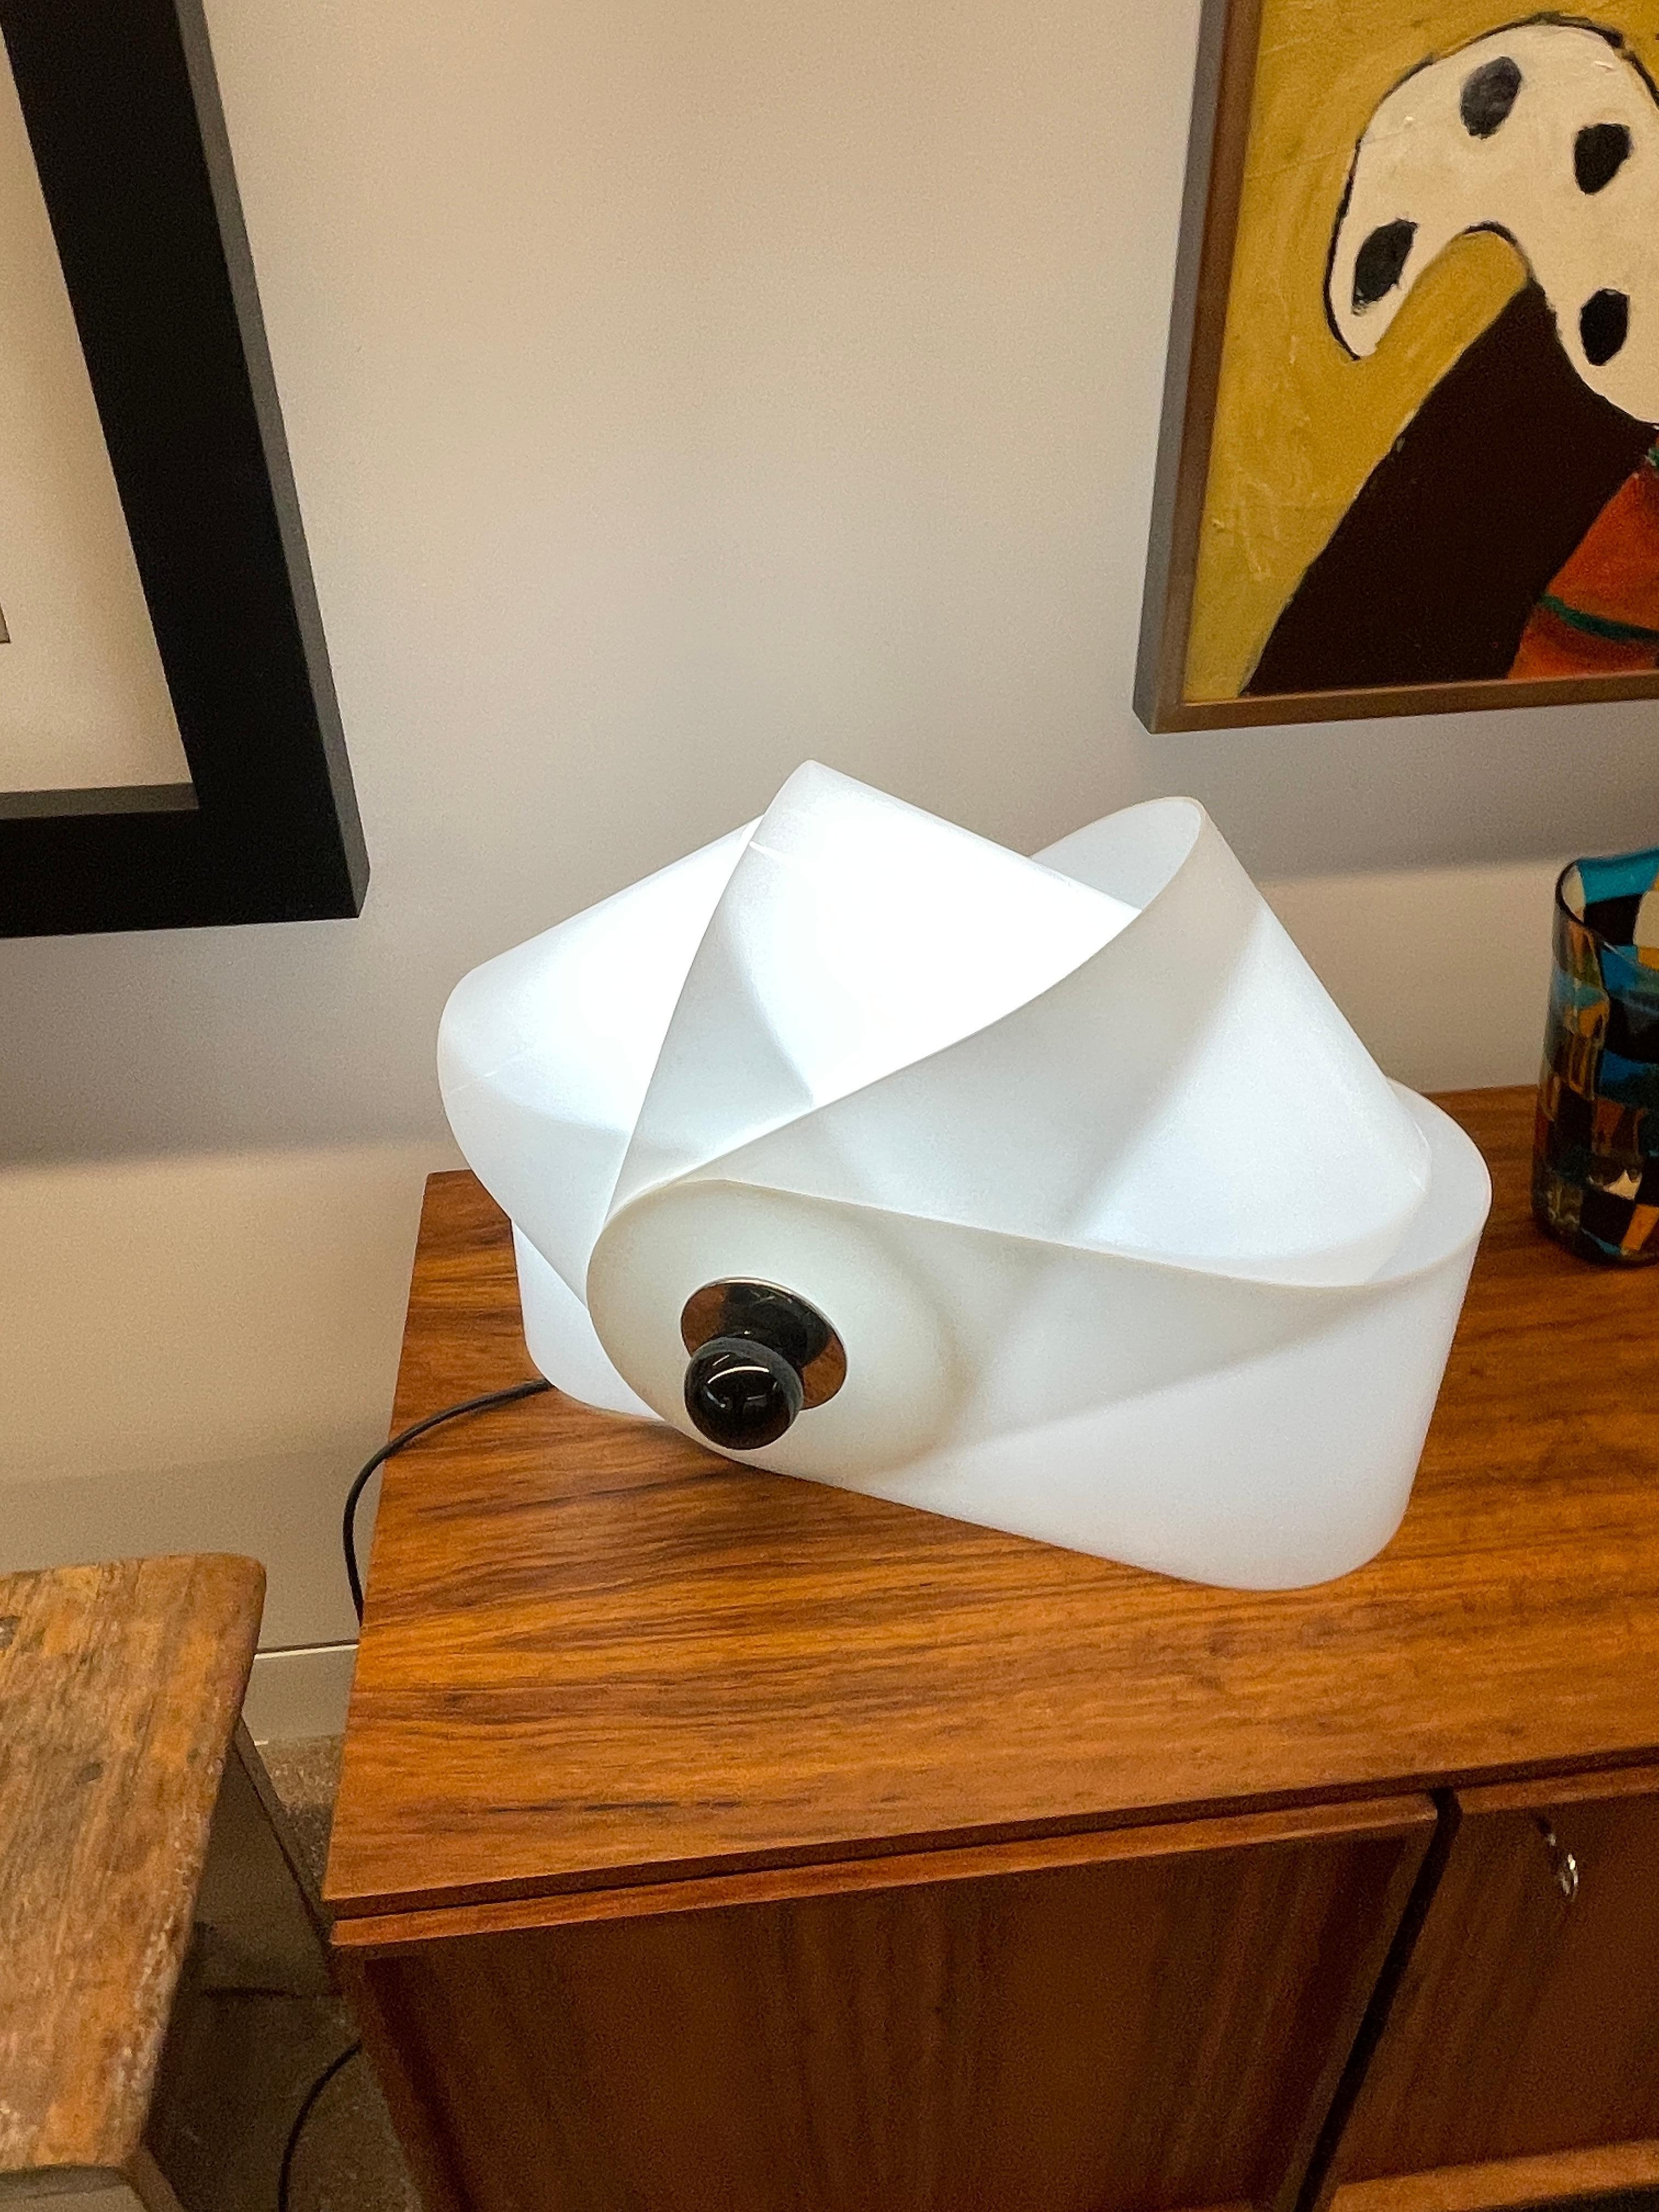 20th Century Early Production White Model “Gherpe” Table Lamp by Superstudio for Poltronova For Sale